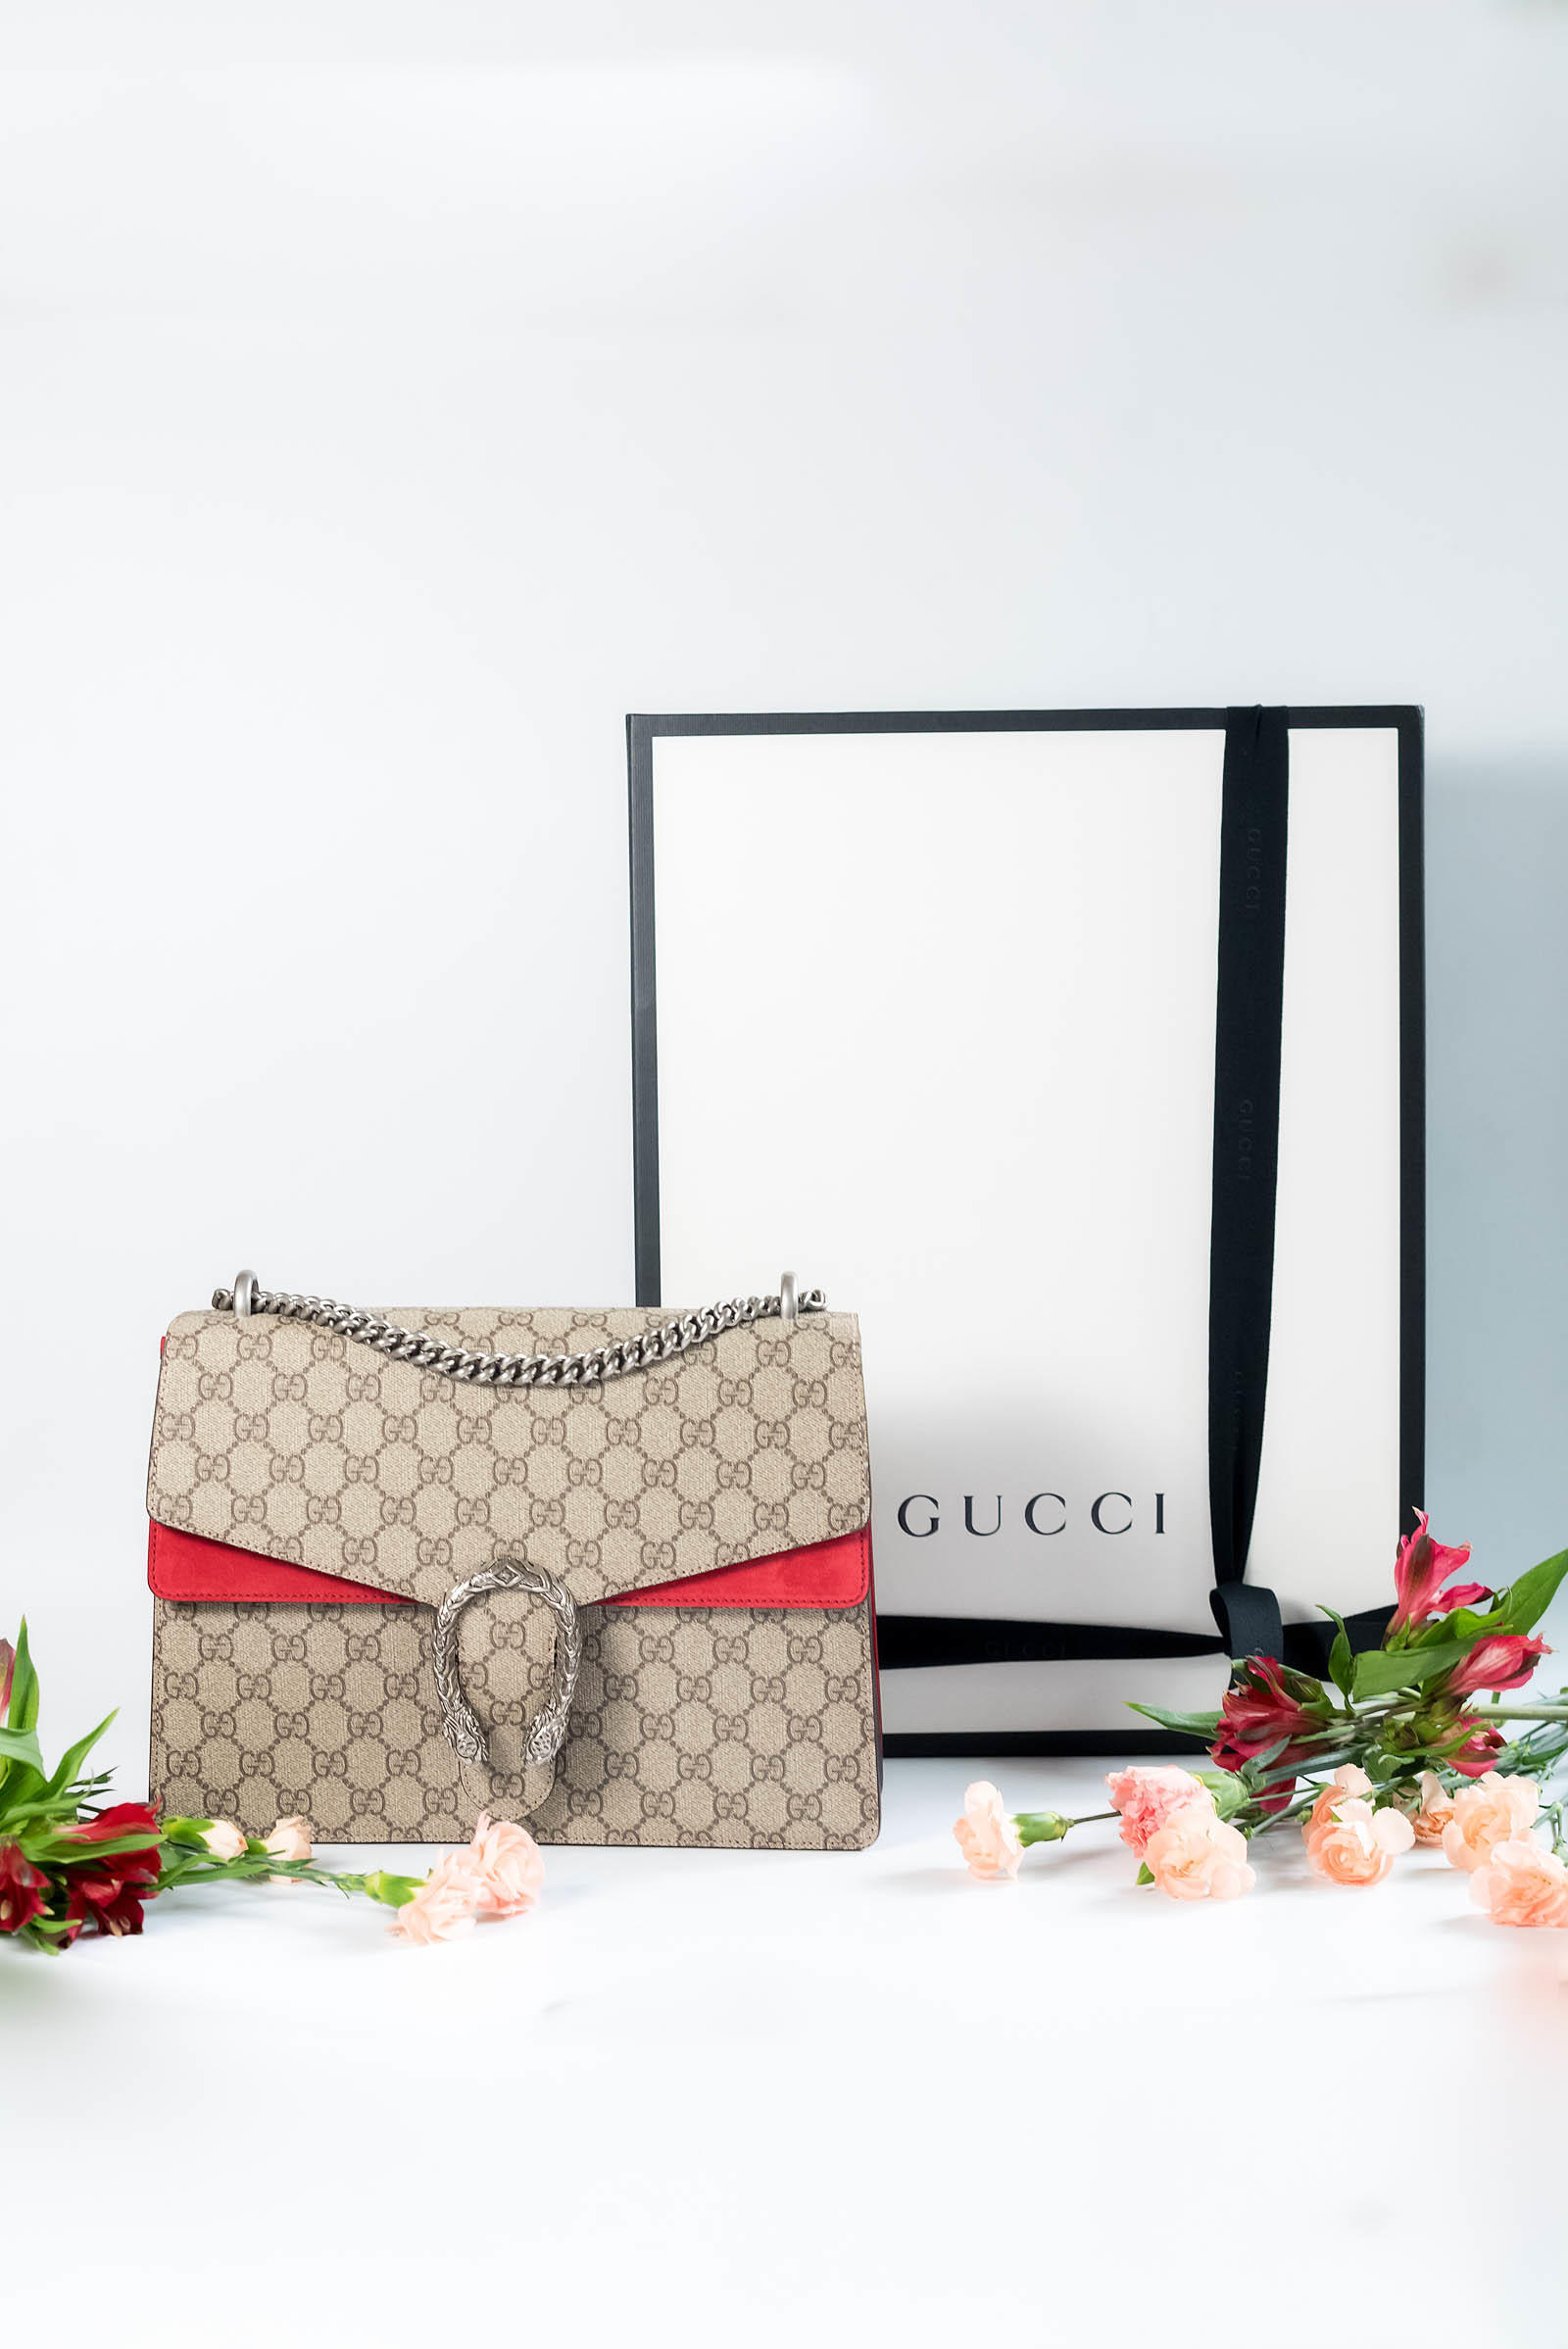 I Finally Purchased the Gucci Bag of My Dreams - PurseBlog